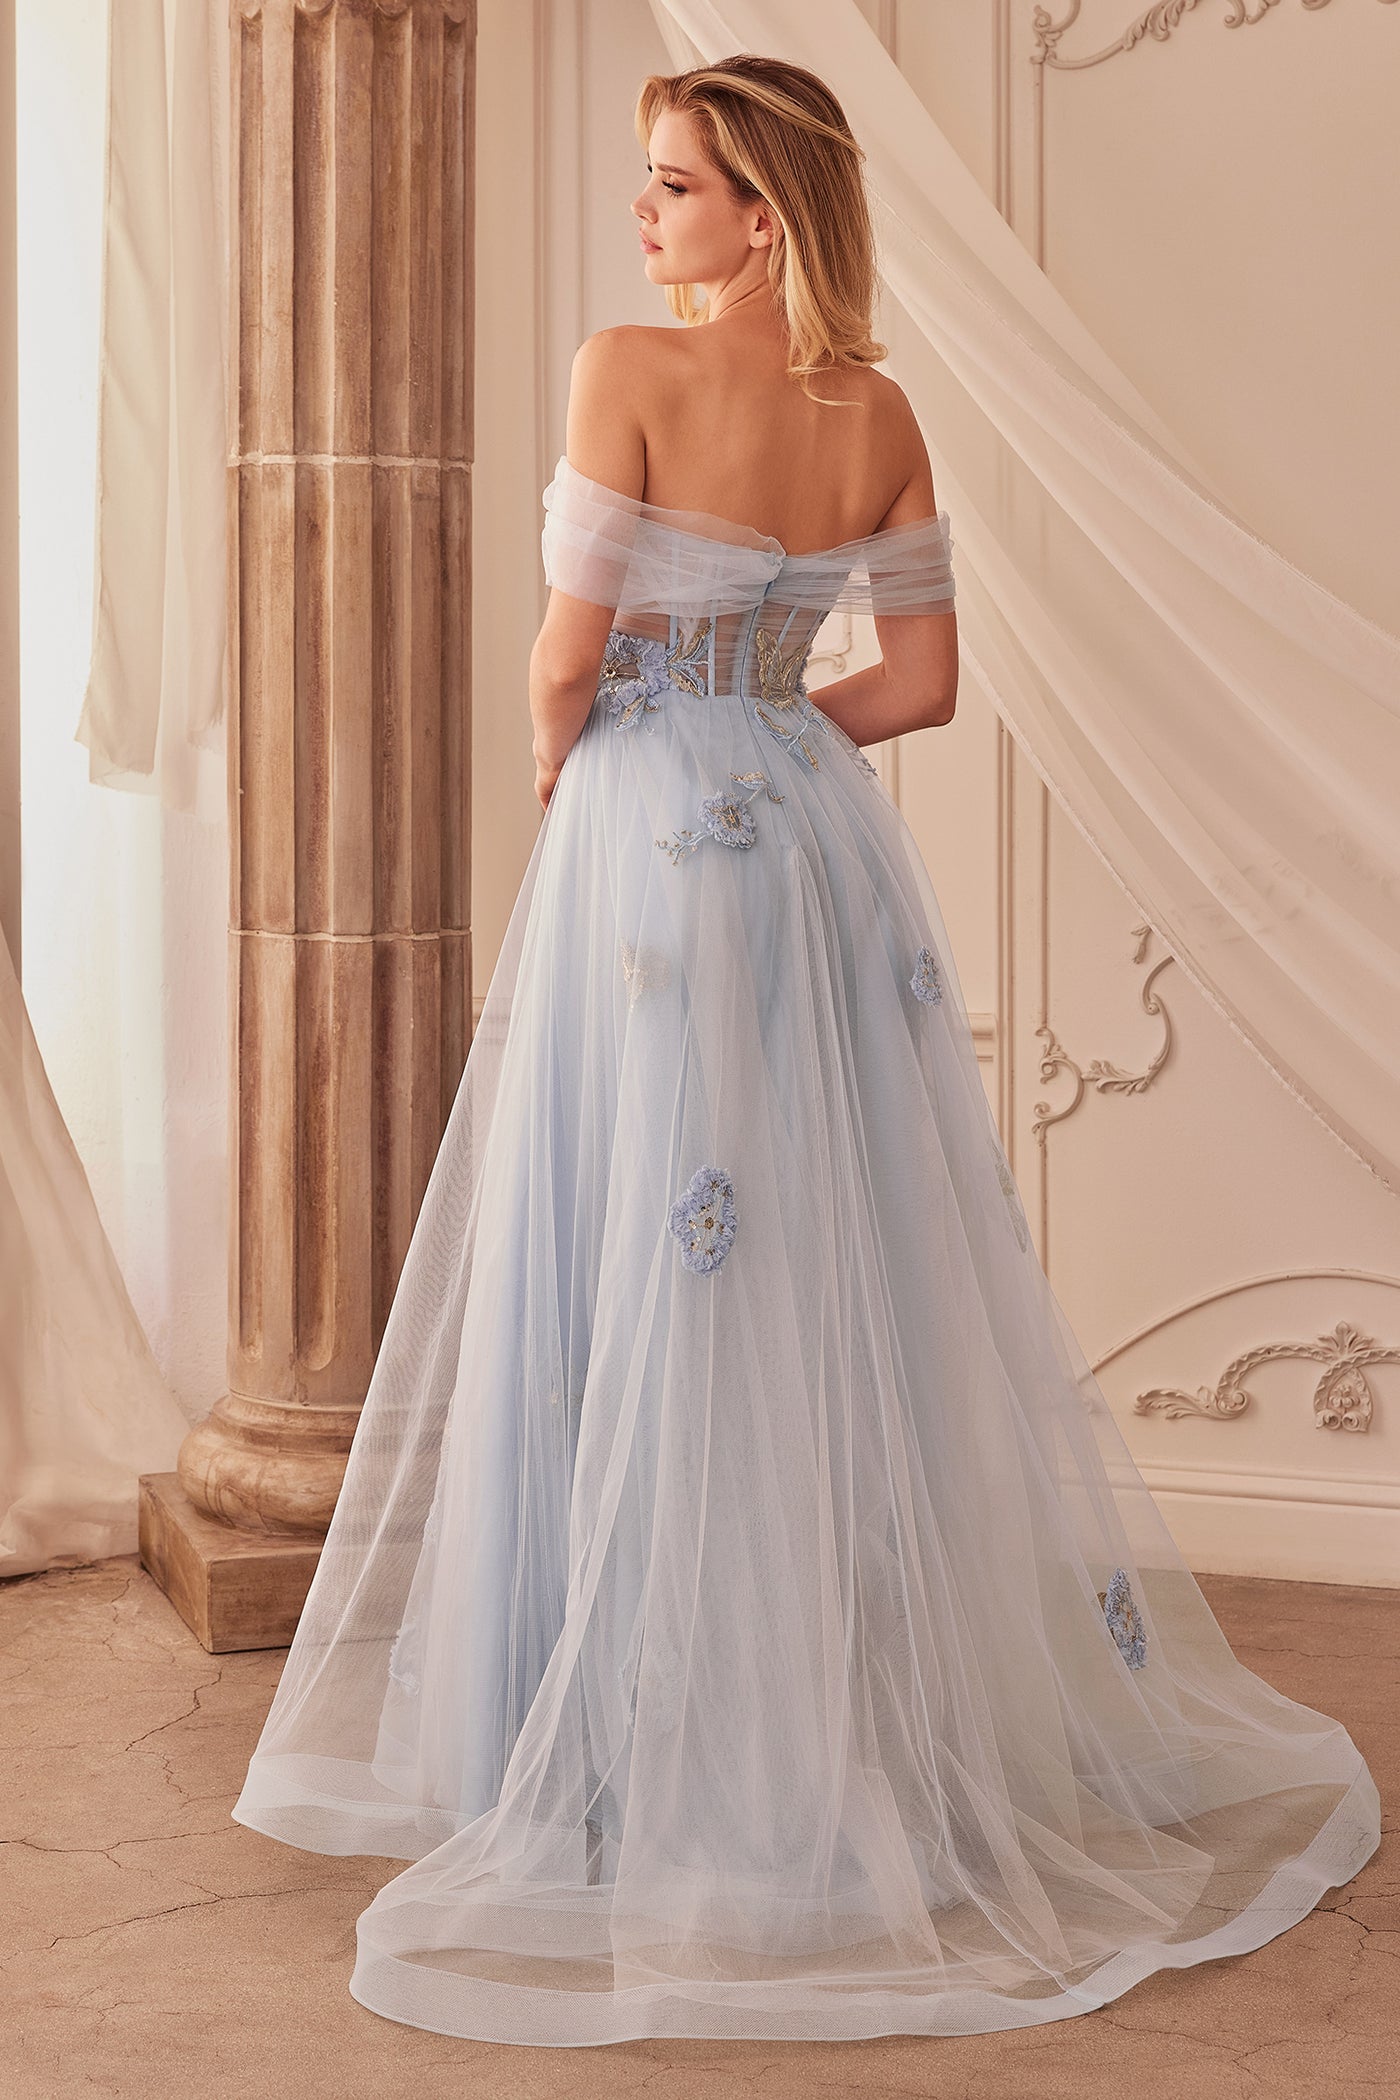 Andrea And Leo A1246 - Sweetheart Appliqued Evening Dress